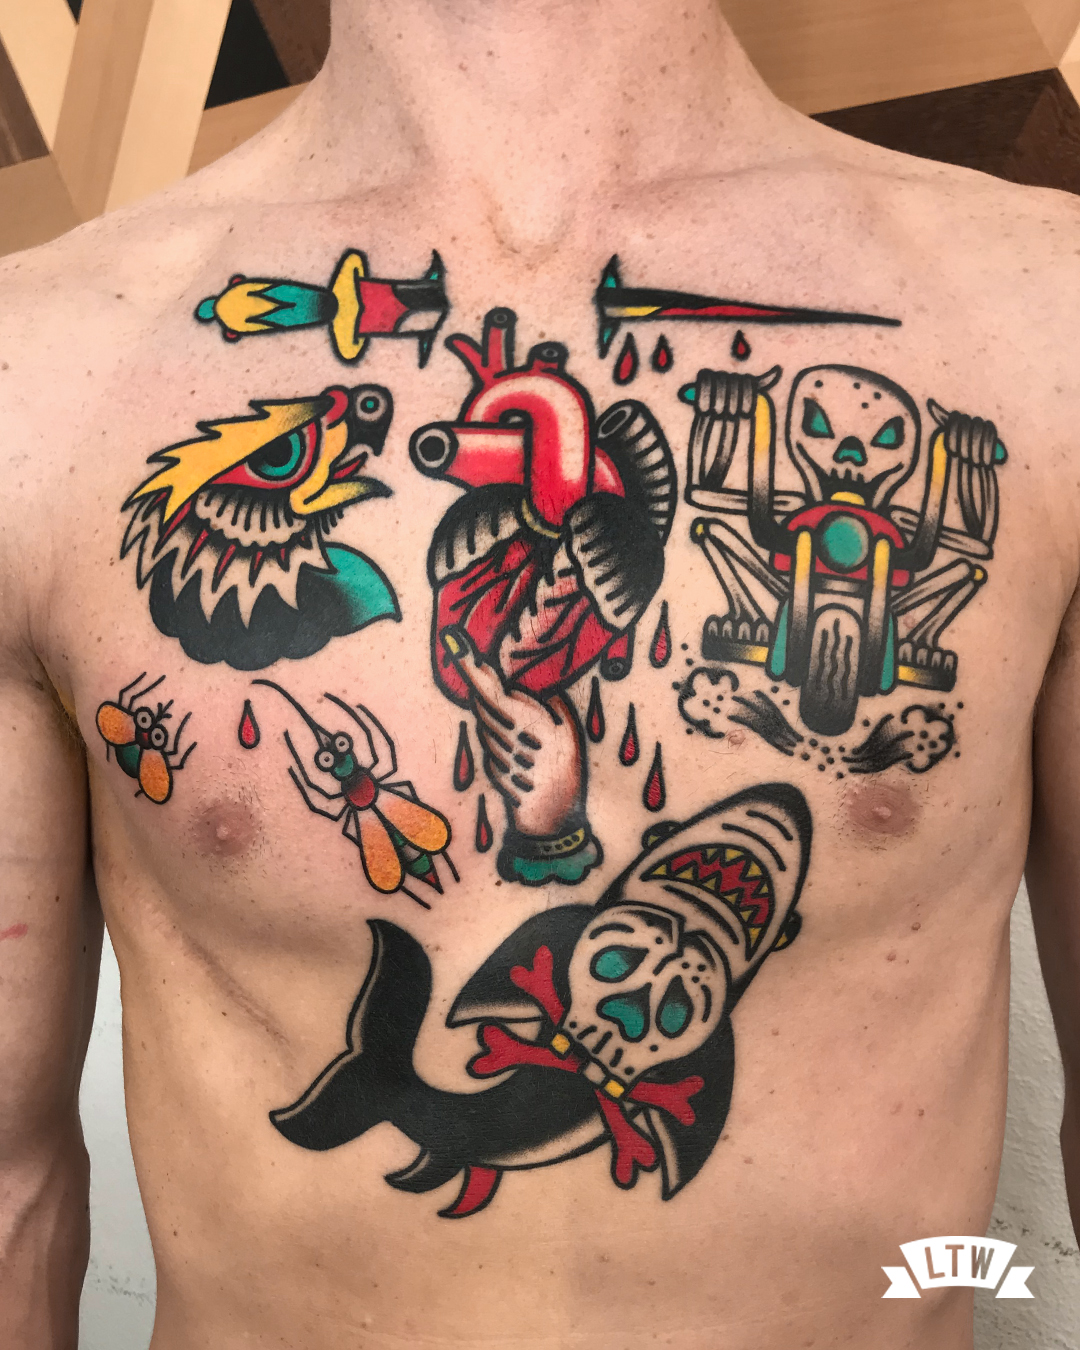 Tattooed torso in color by Javier Rodríguez